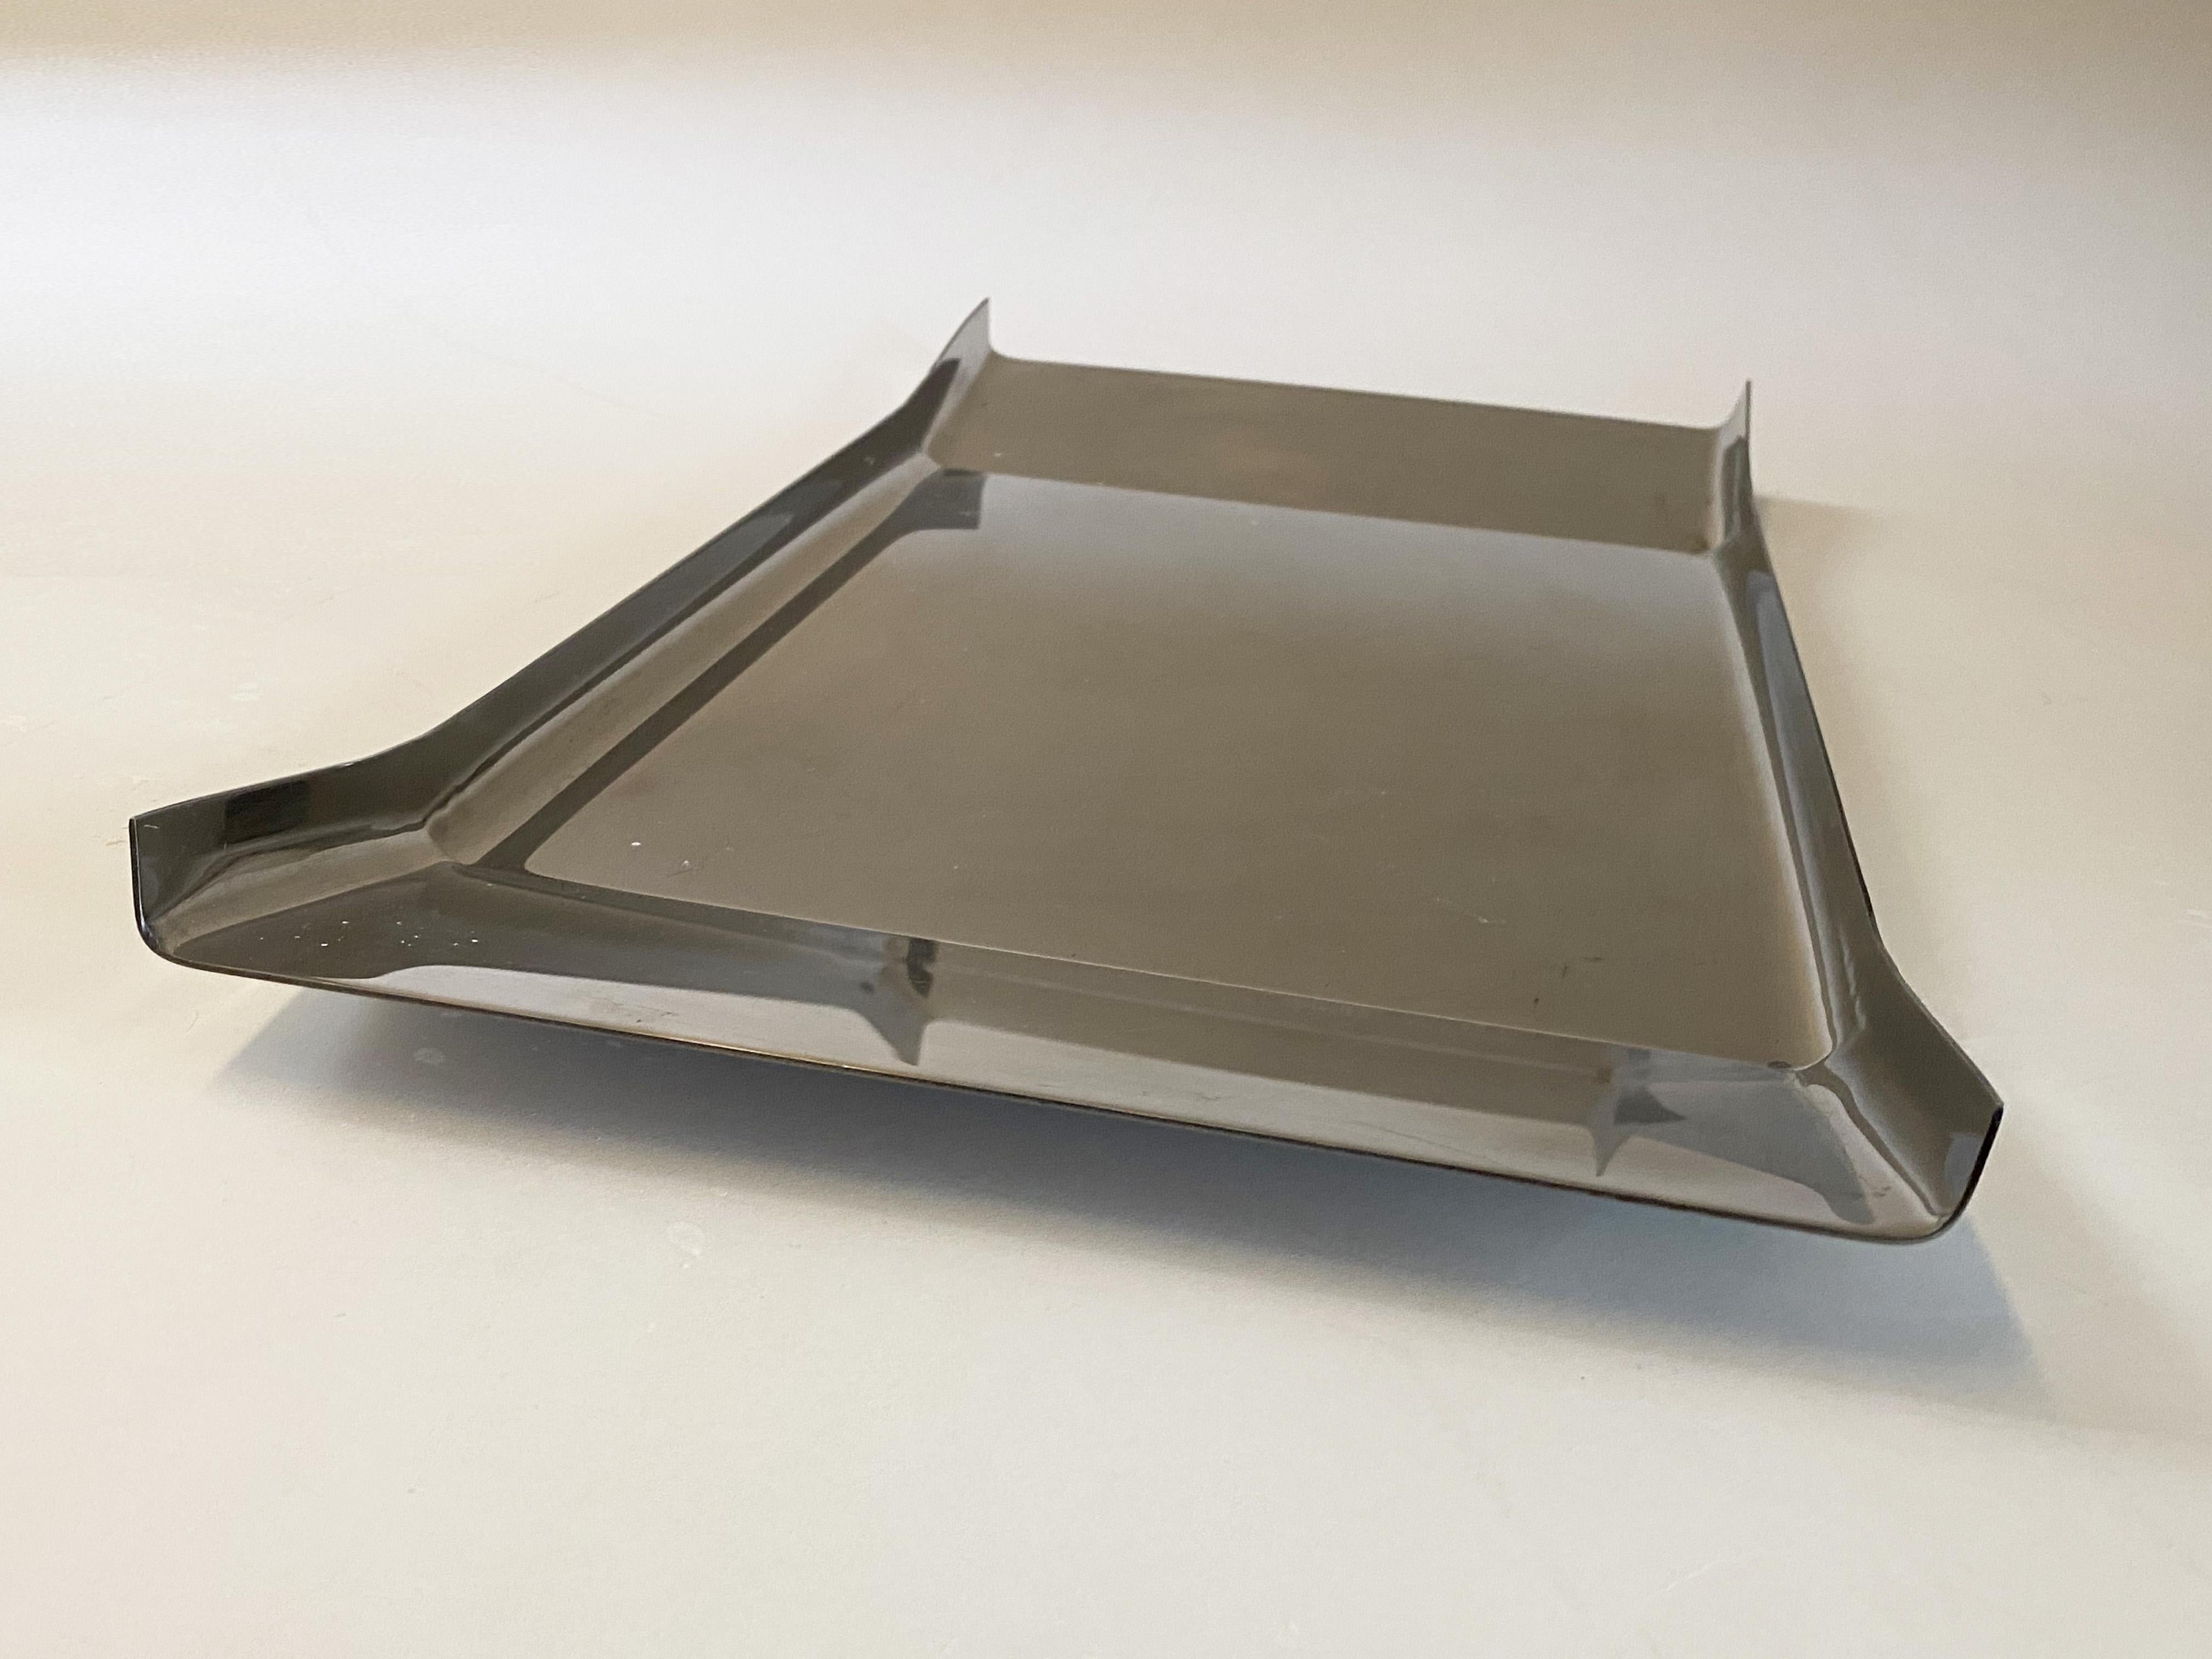 Italian Modernist Arran Tray in Stainless Steel by Enzo Mari for Danese Milano. For Sale 4